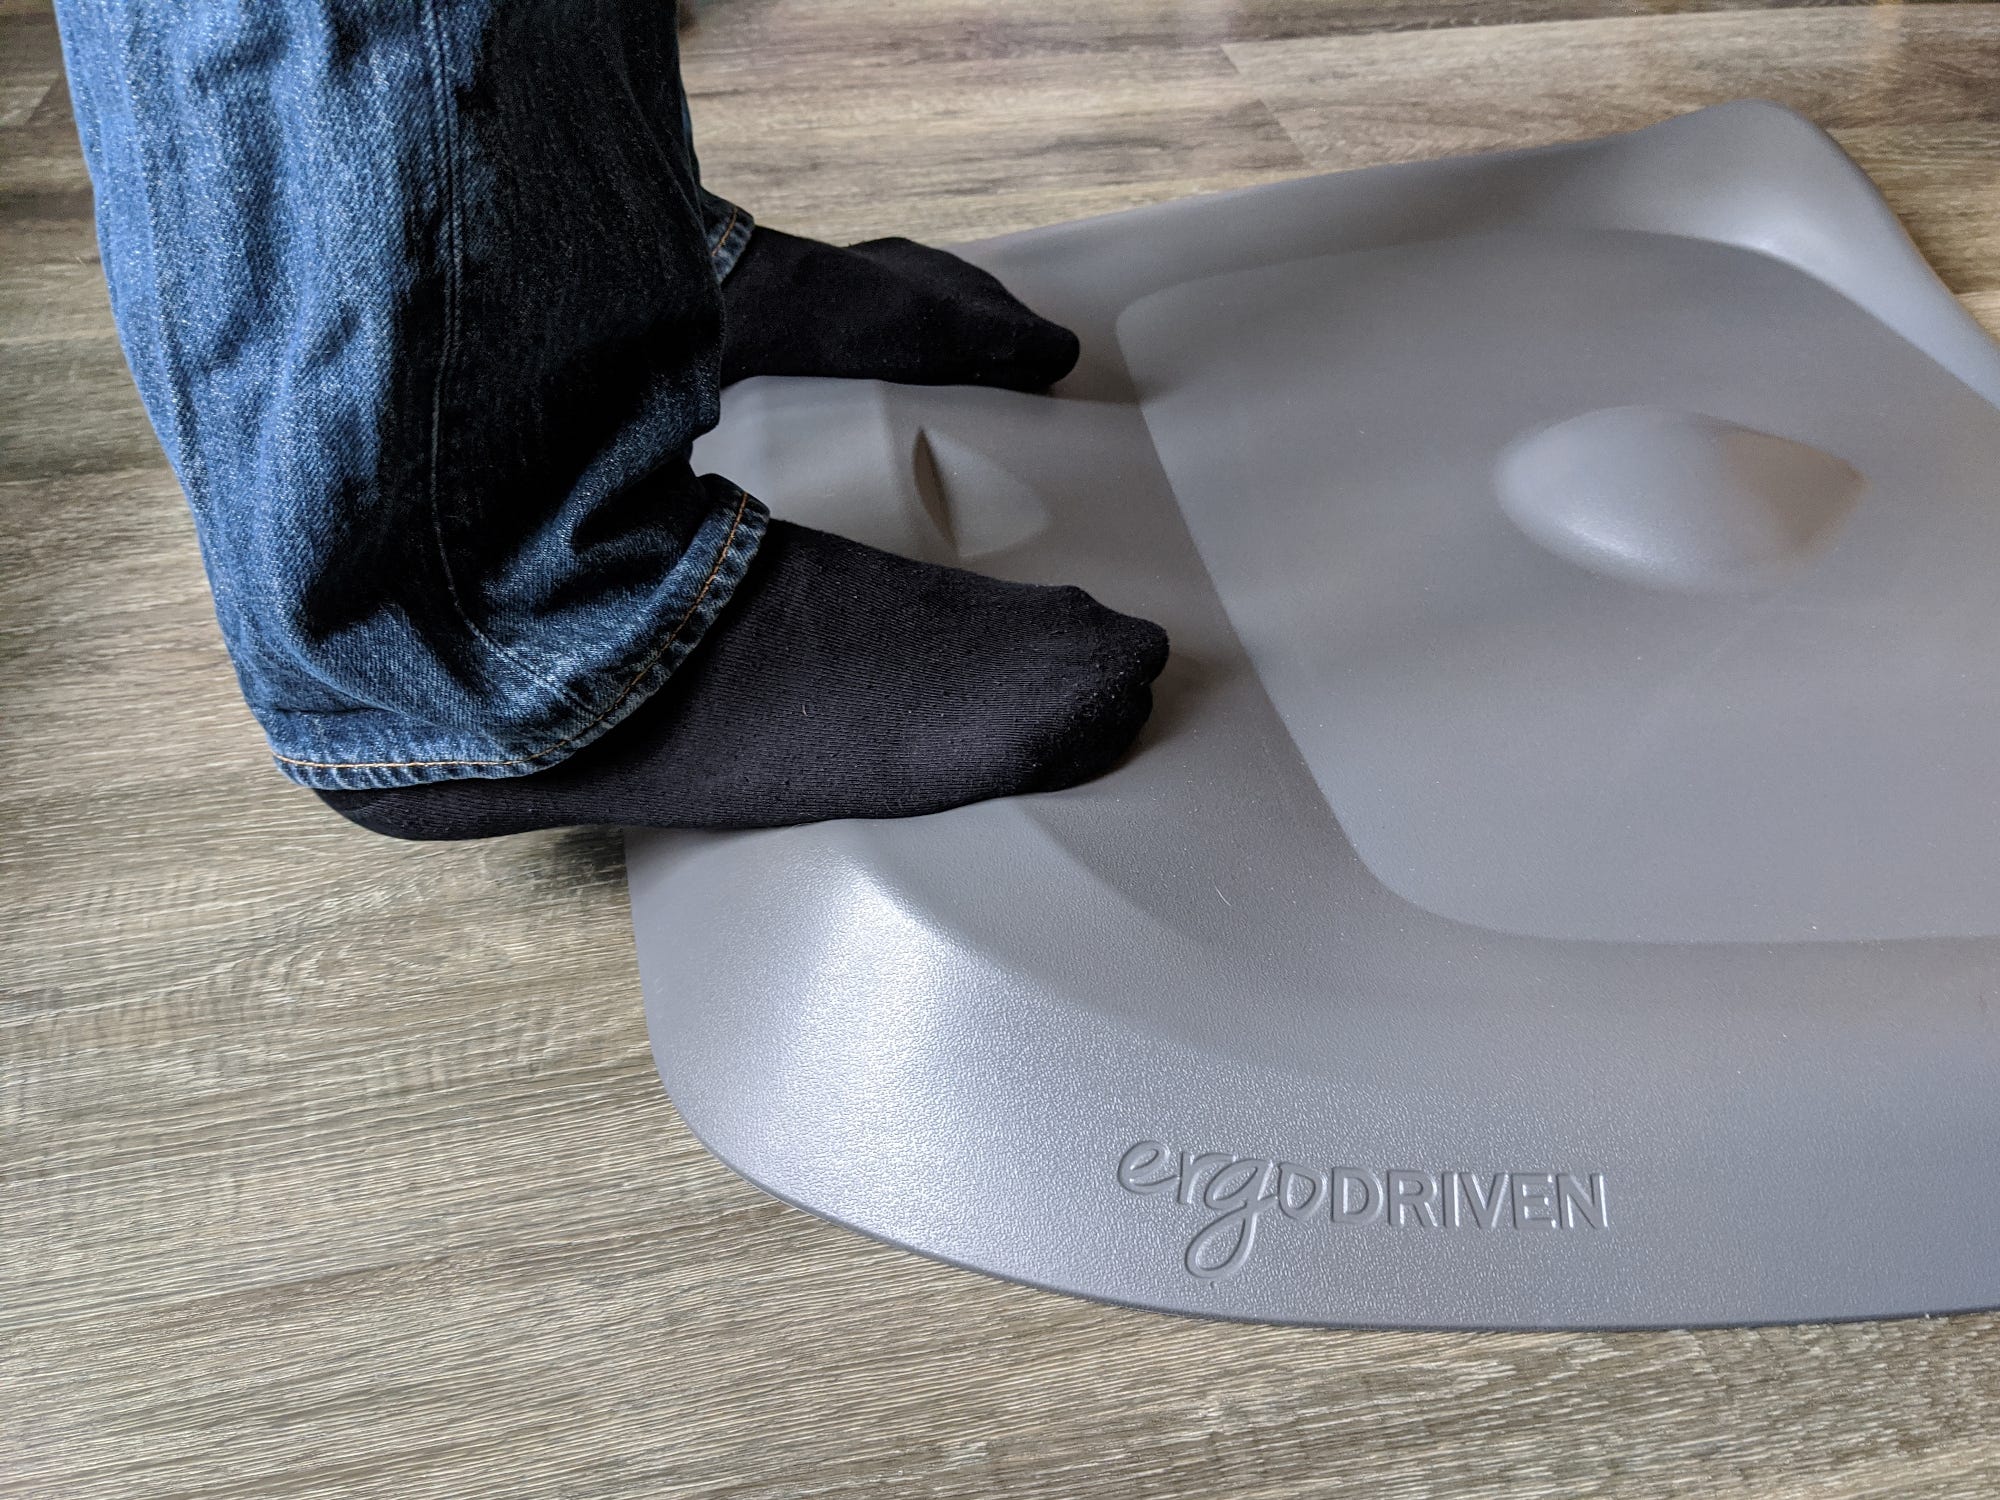 The Ergodriven Topo standing desk mat isn't cheap, but it really helps with  sore feet and muscle fatigue